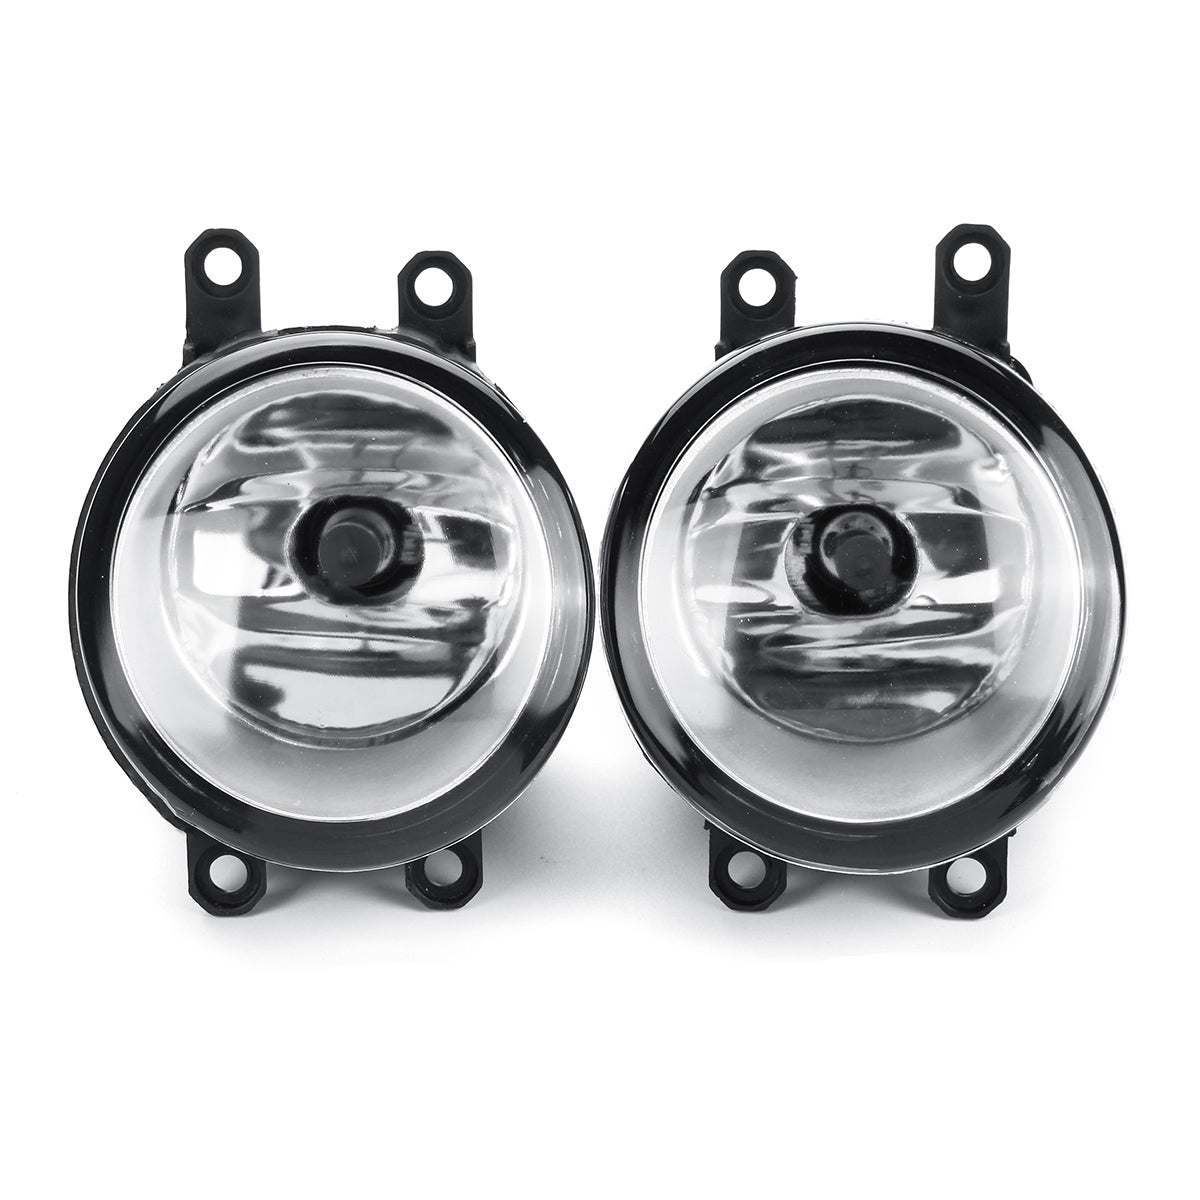 Gray Pair H11 Car Front Bumper Halogen Fog Lights Lamp with Wires Switch for Toyota C-HR CHR 2016-2018